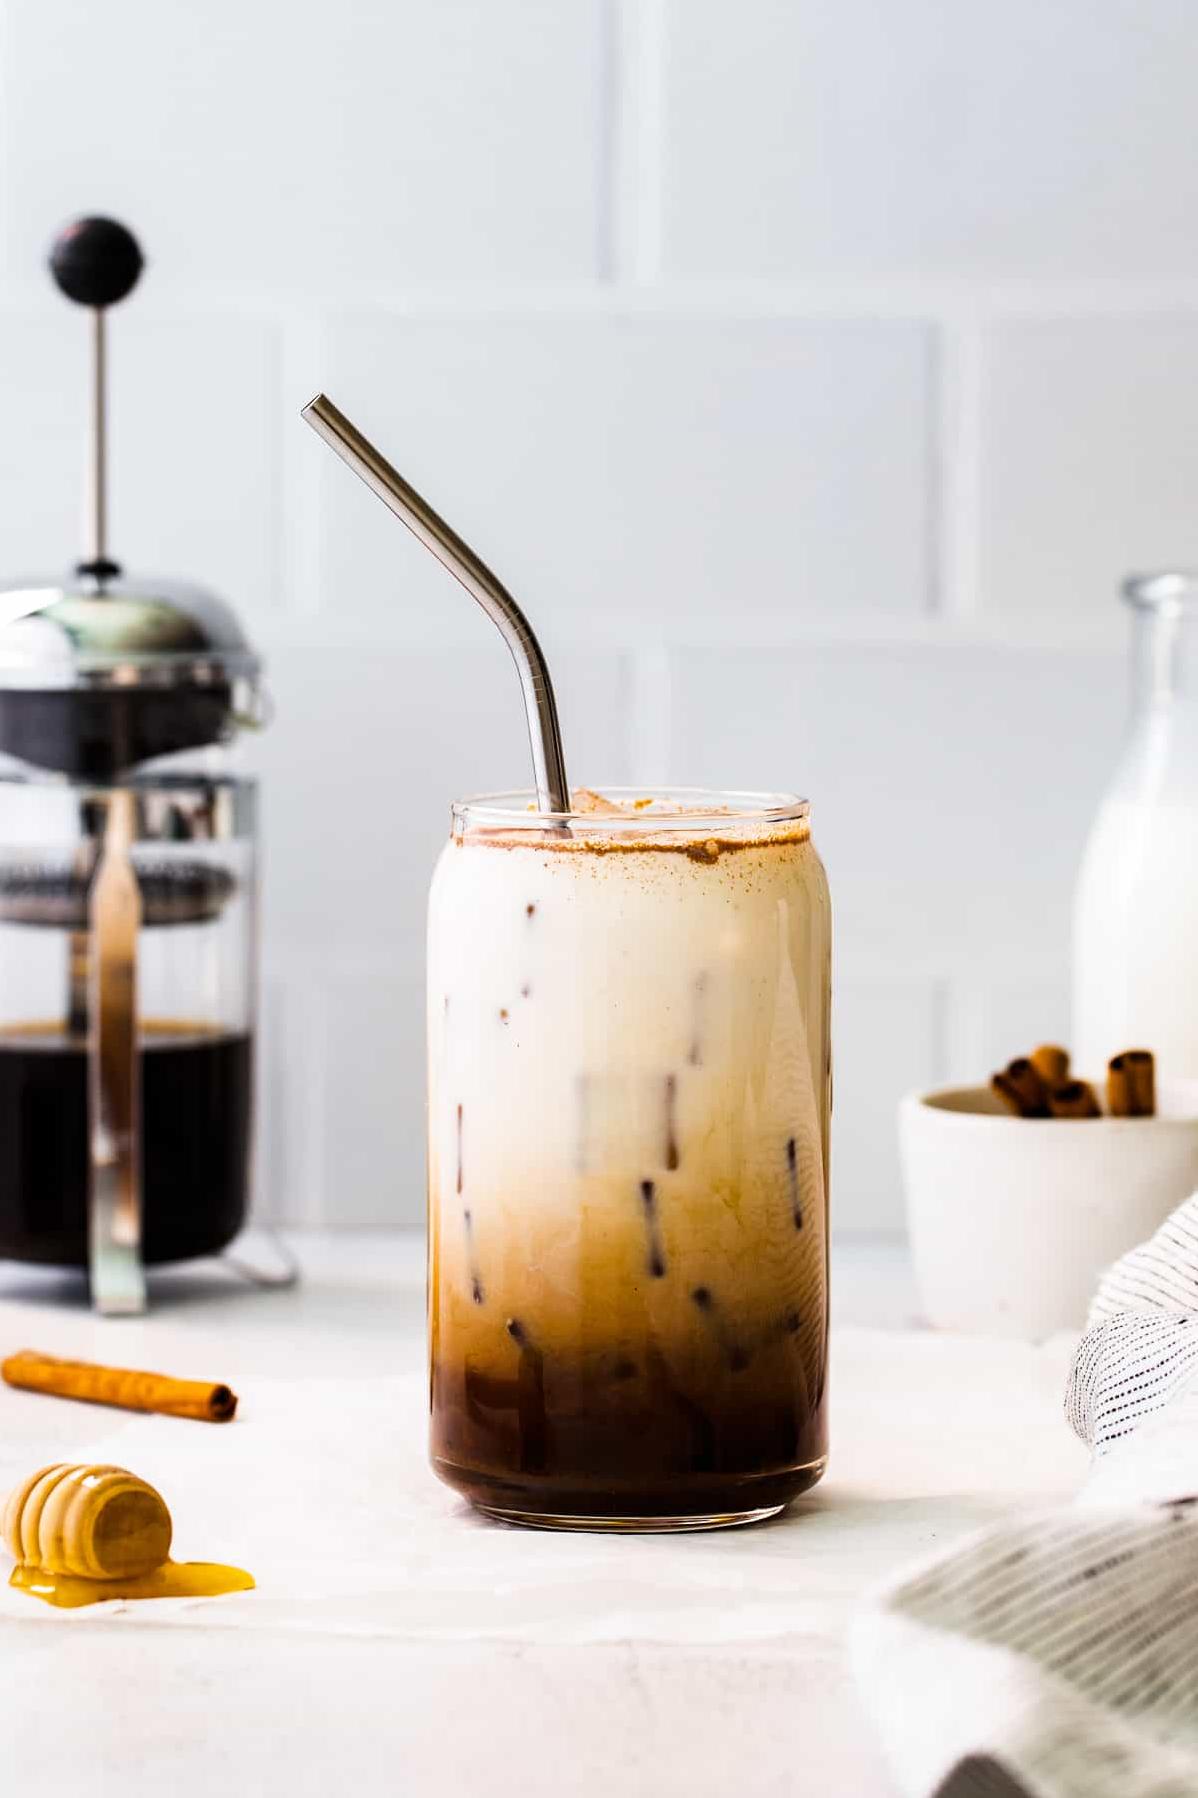 Sure, here are some creative photo captions for the recipe of Honey Iced Coffee: